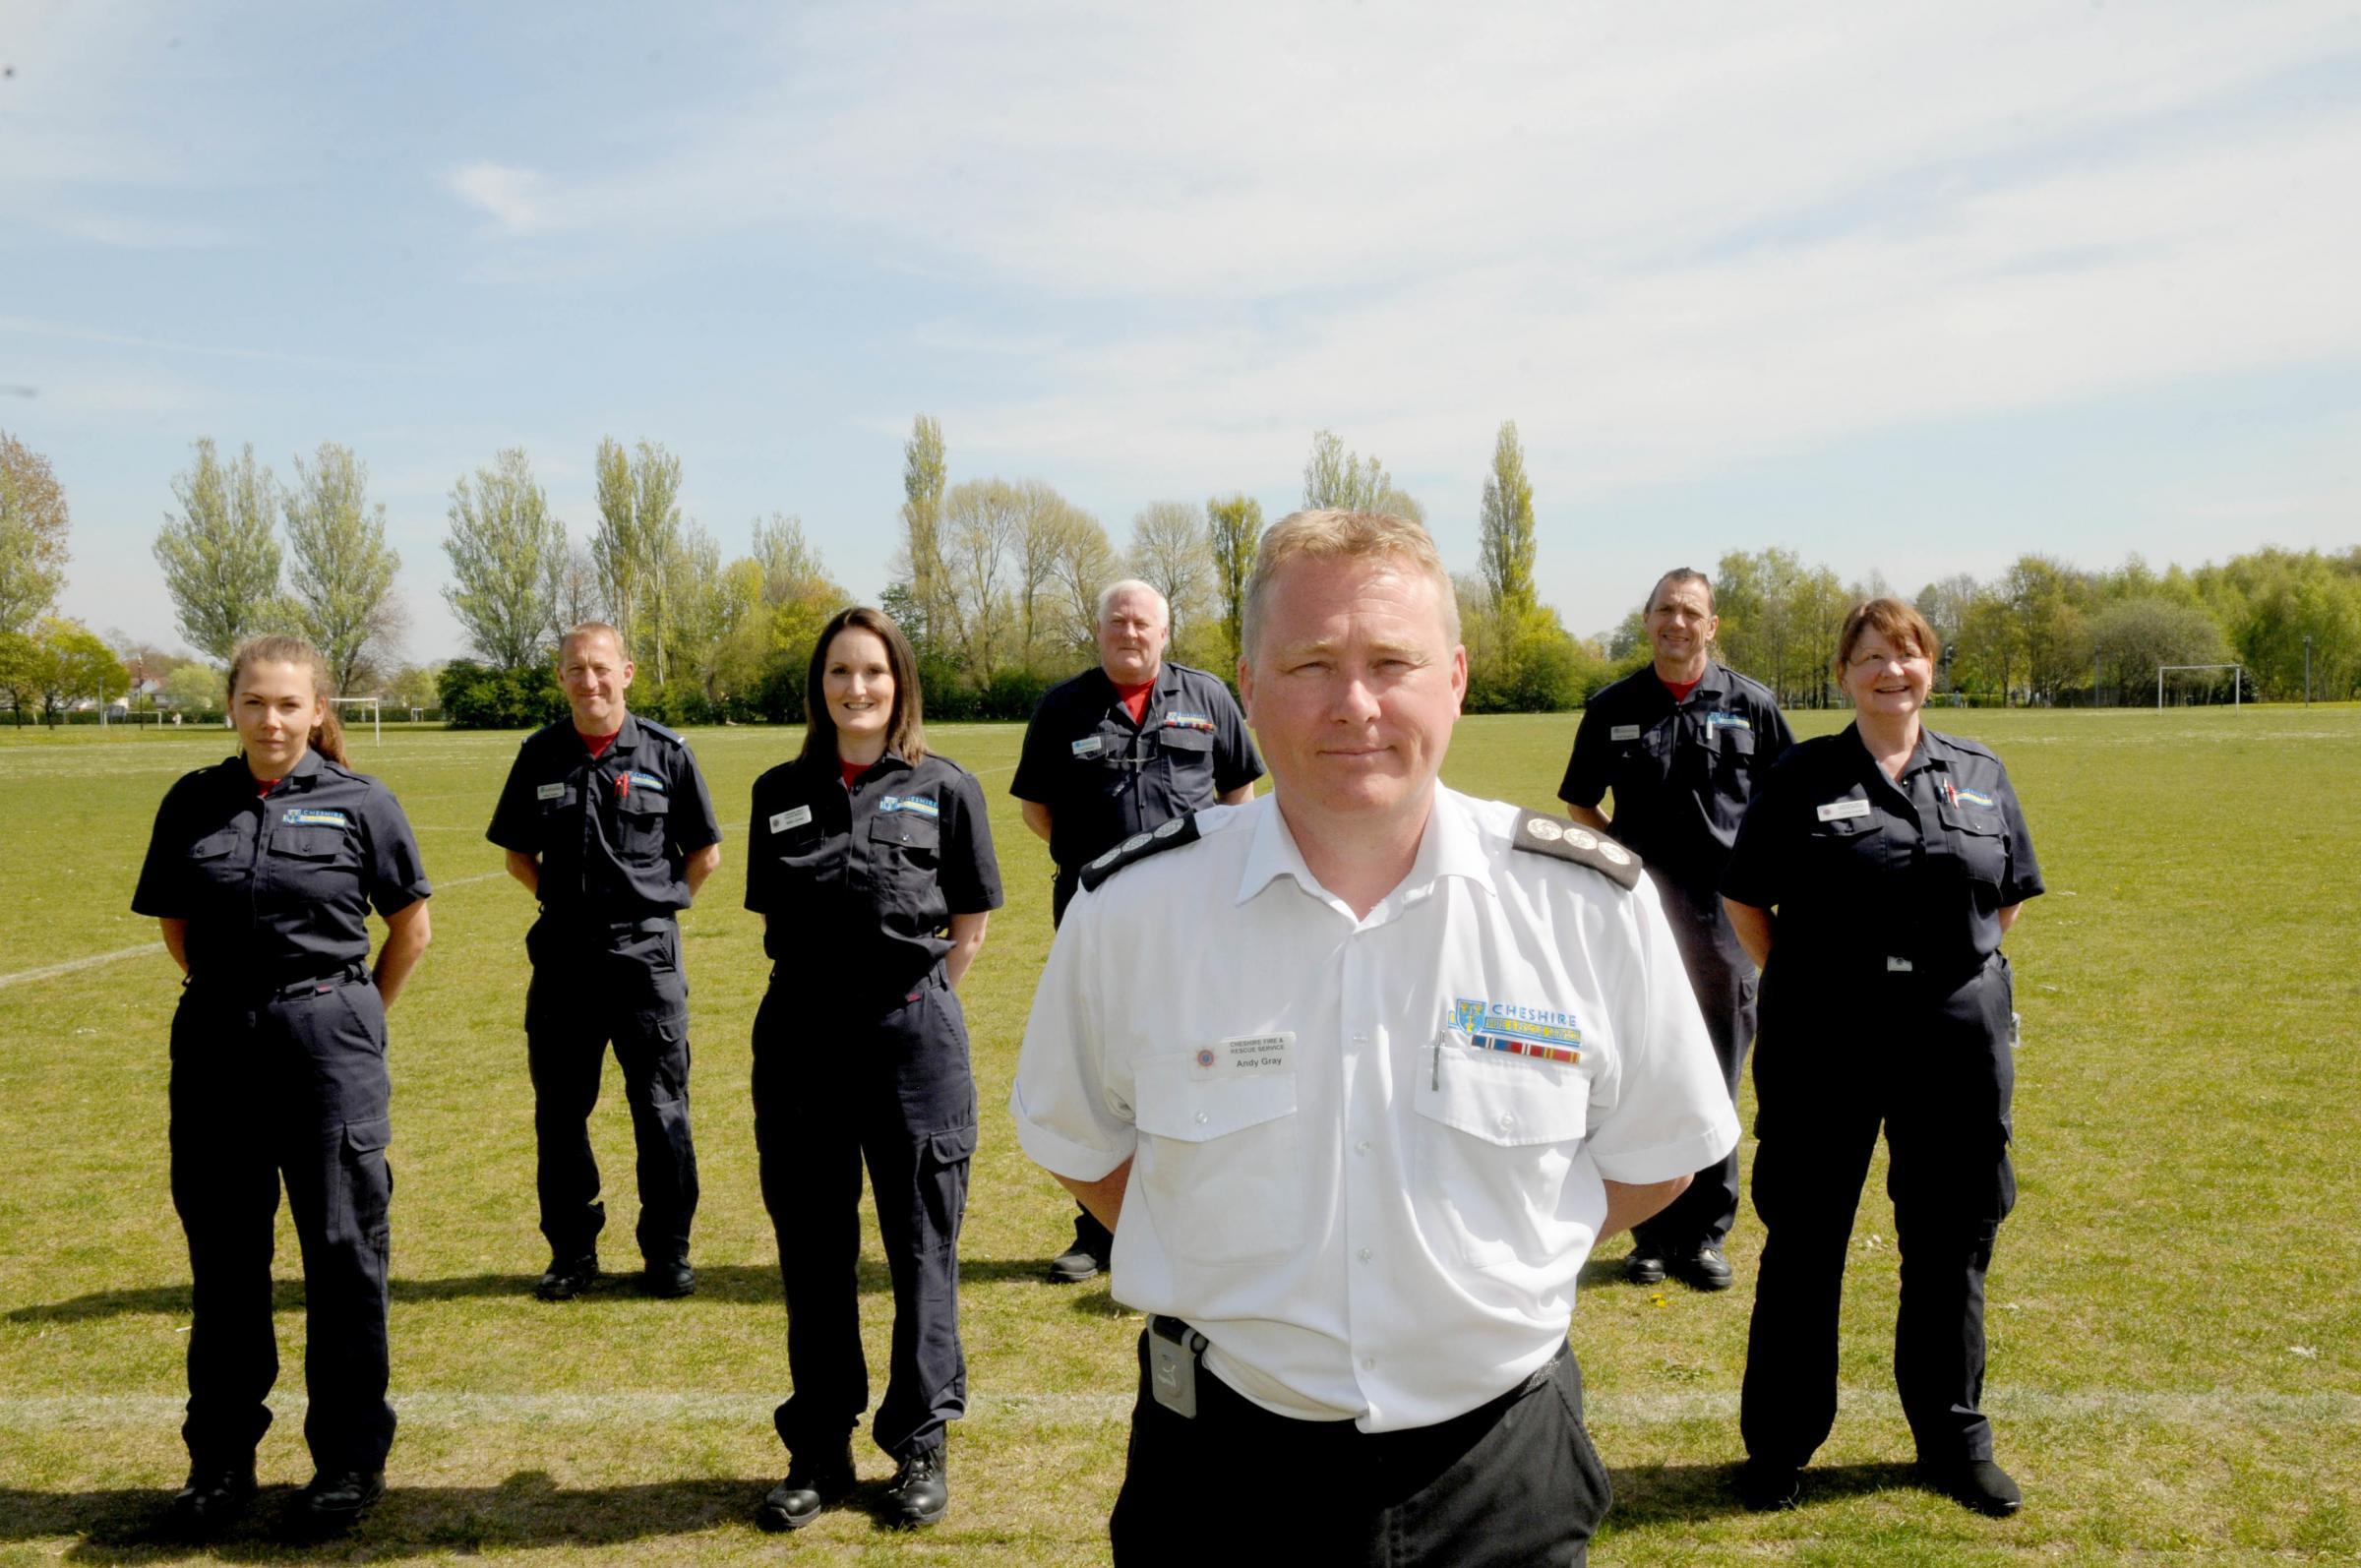 Andy Gray and the Cheshire Fire and Rescue Service staff assisting at the Covid vaccination centre at Orford Jubilee Hub in the summer